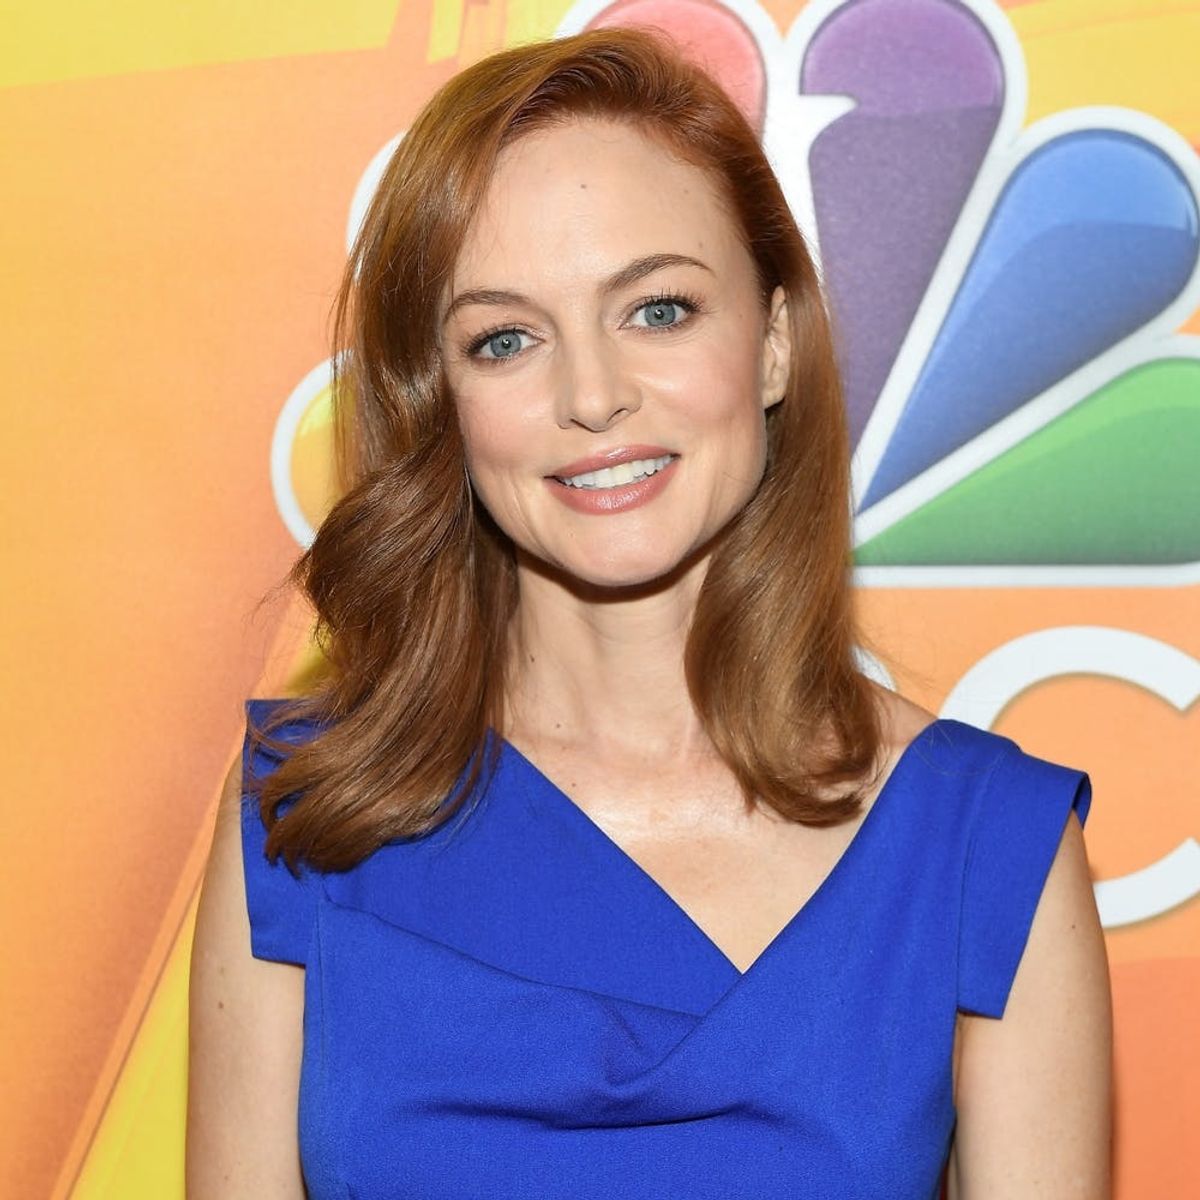 Heather Graham Thinks Her Looks May Have Prevented Her from Getting Smart Roles